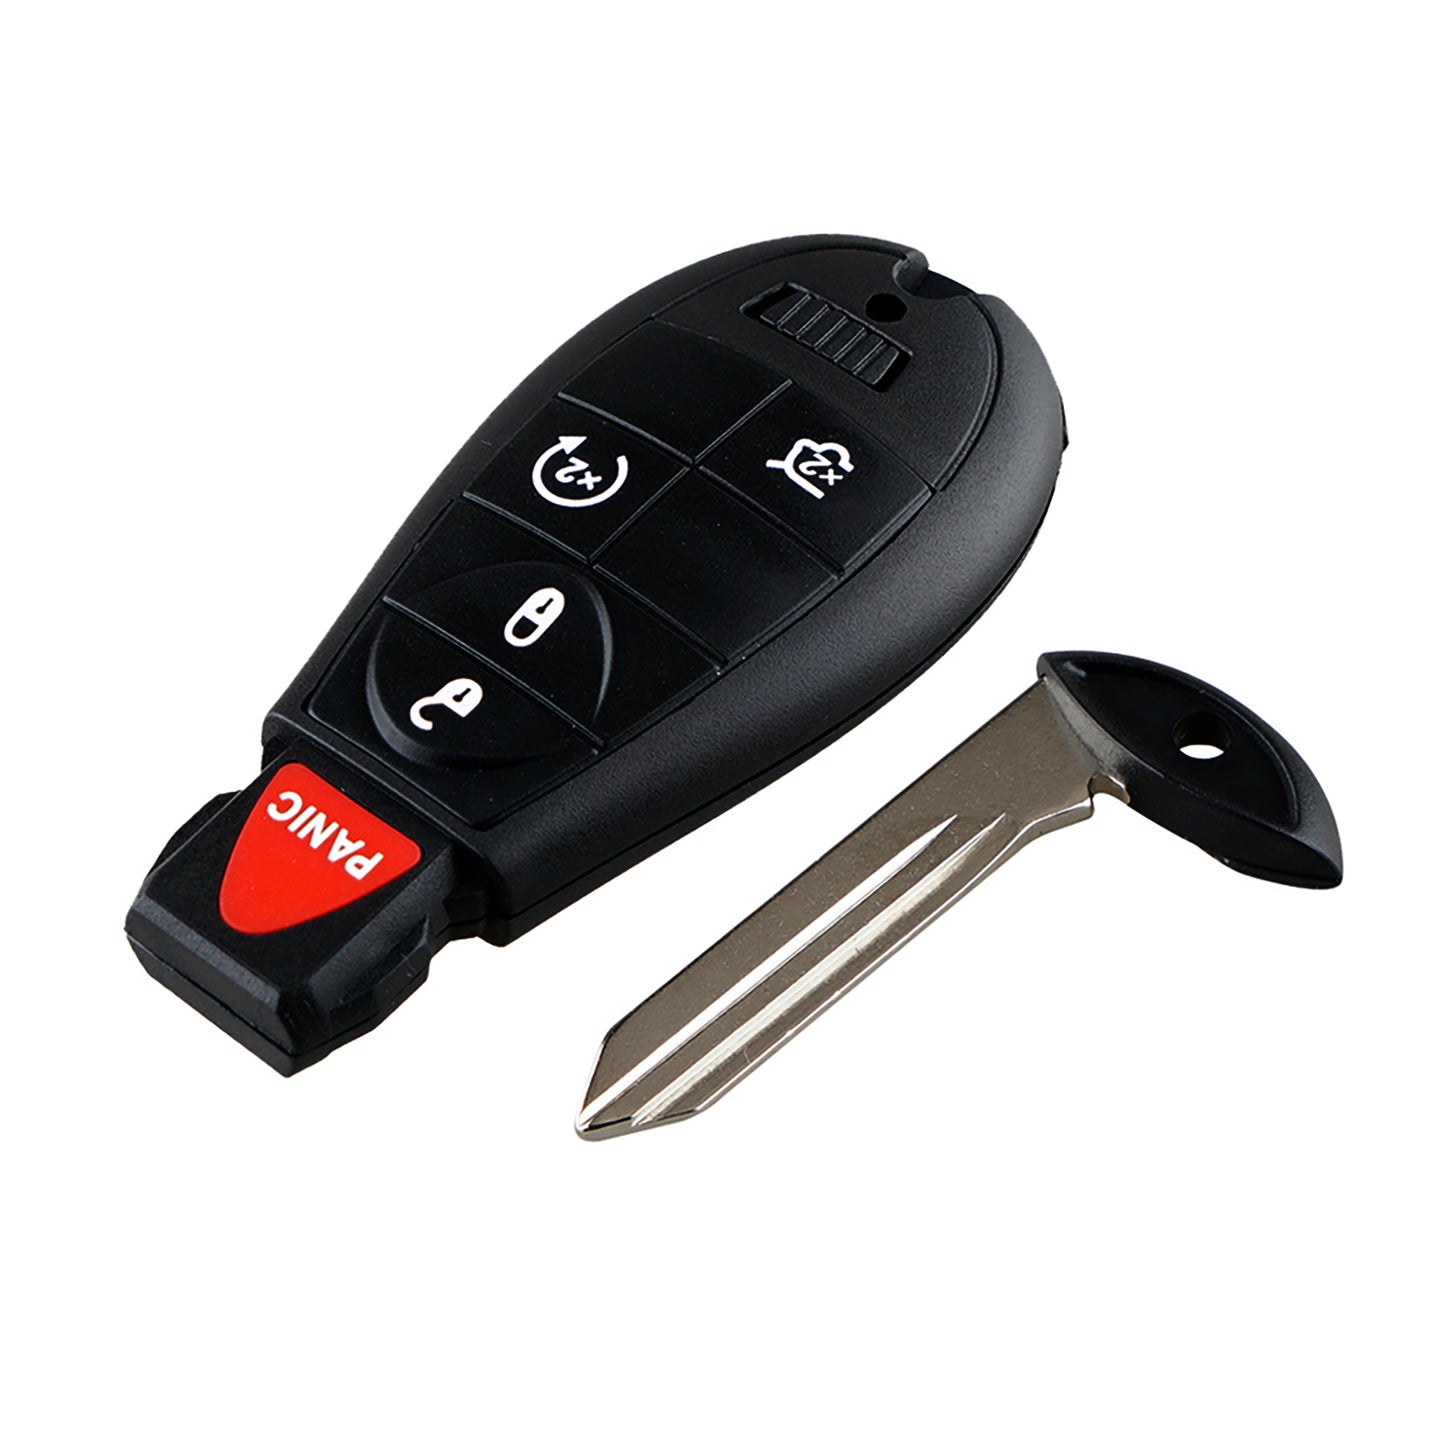 5 Buttons 433MHz Keyless Entry Fob Remote Key For 2008-2010 Jeep Grand Cherokee FCC ID: M3N5WY78F, IYZ-C01C SKU : J062